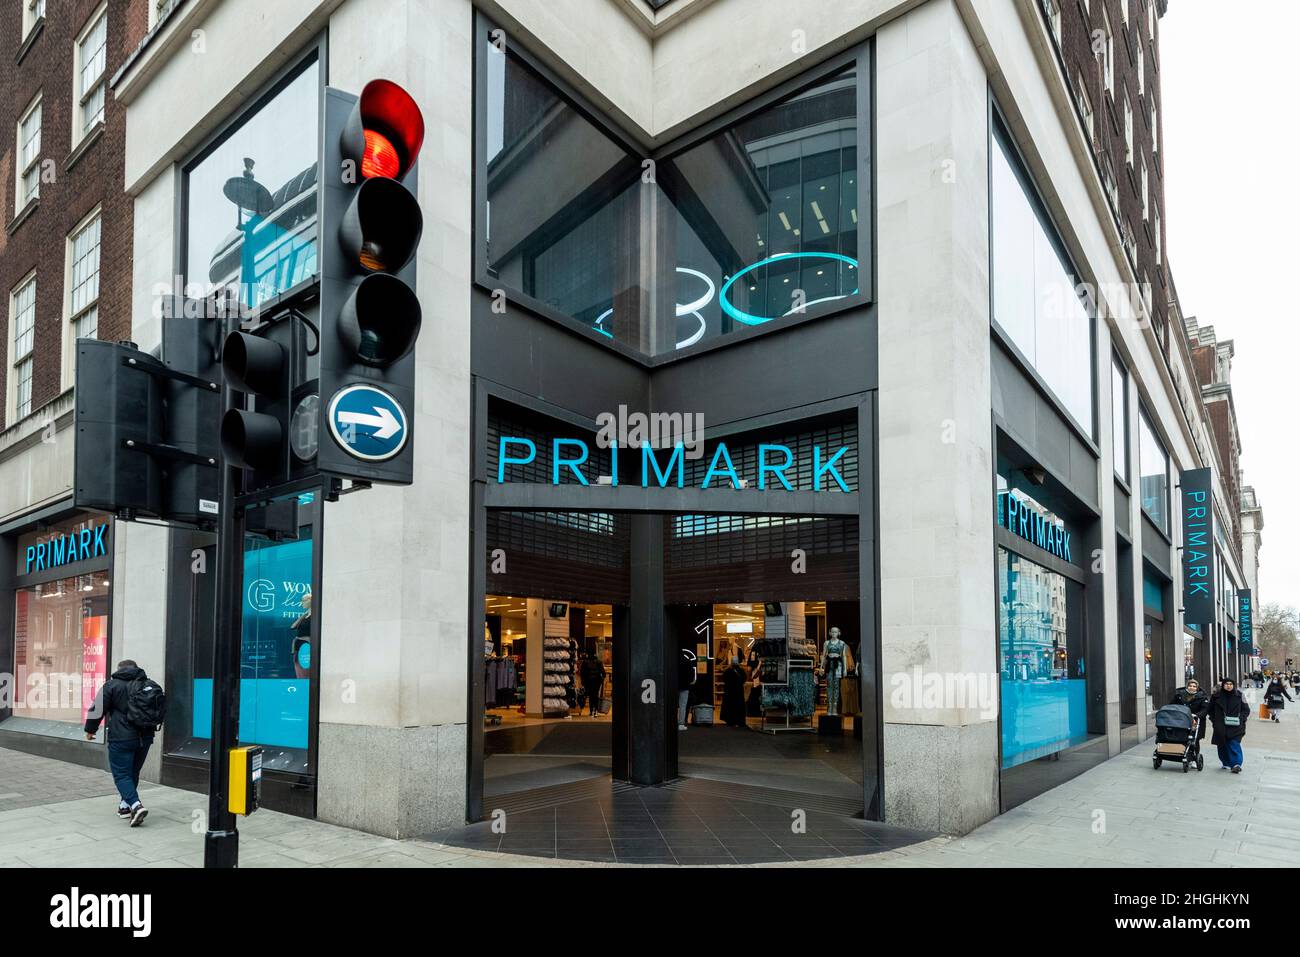 London, UK. 21st Jan, 2022. The exterior of Primark's flagship store on Oxford Street. The retailer has announced that rather than put prices up, 400 mainly retail manager jobs would be lost as the store reacts to rising costs. Credit: Stephen Chung/Alamy Live News Stock Photo